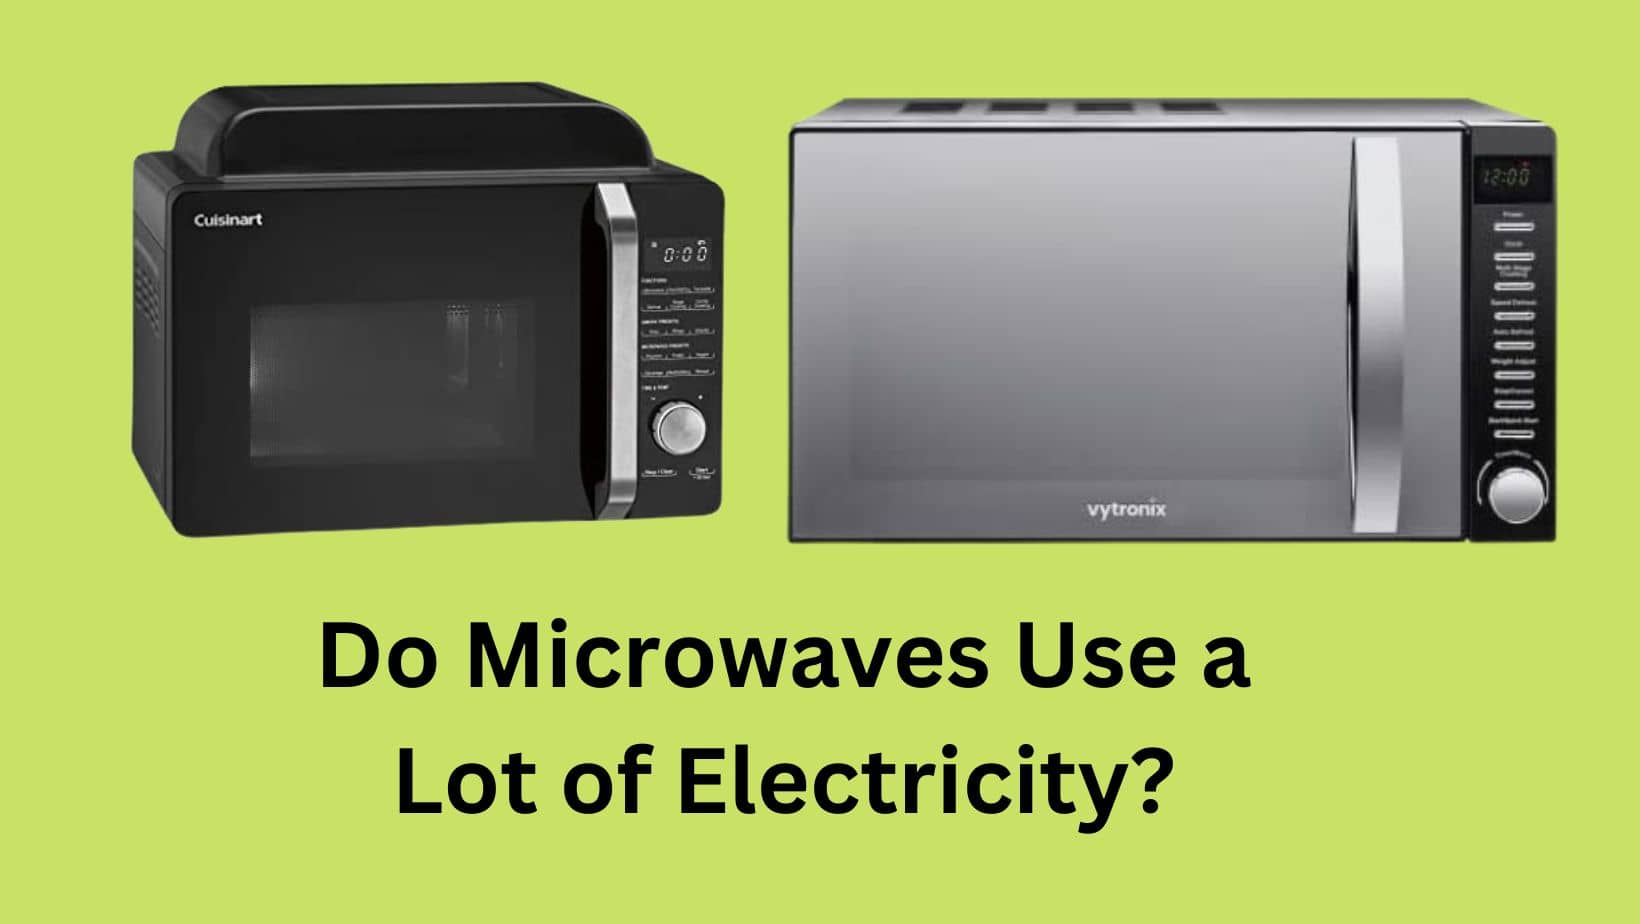 Do Microwaves Use a Lot of Electricity?